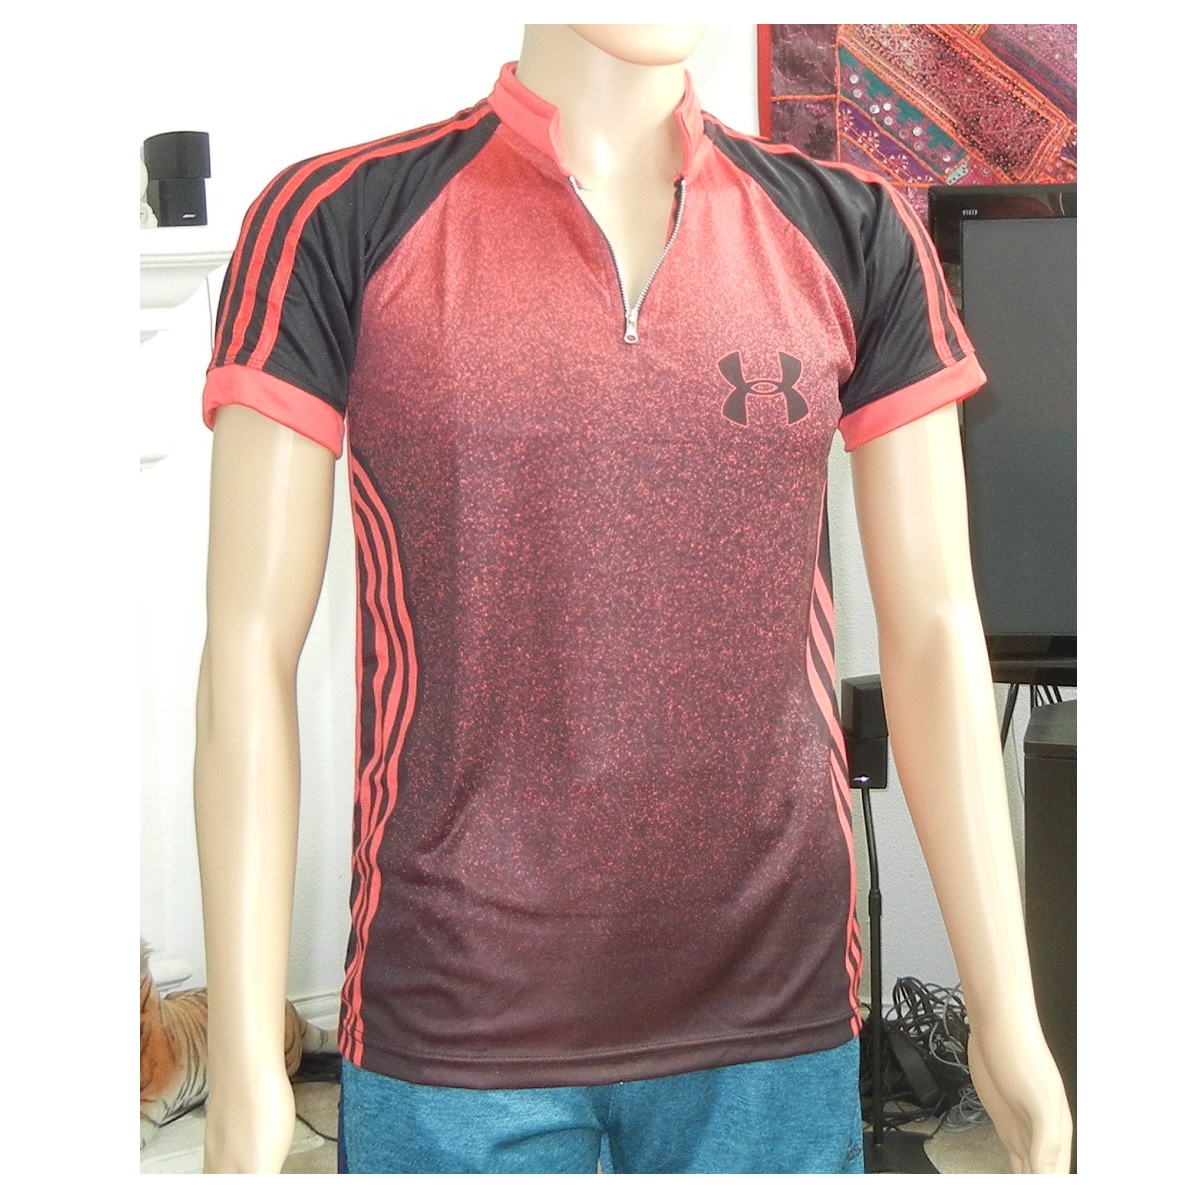 Sublimated T-Shirt for Men, Elegant Colorful gradient design with Stripes, red and black